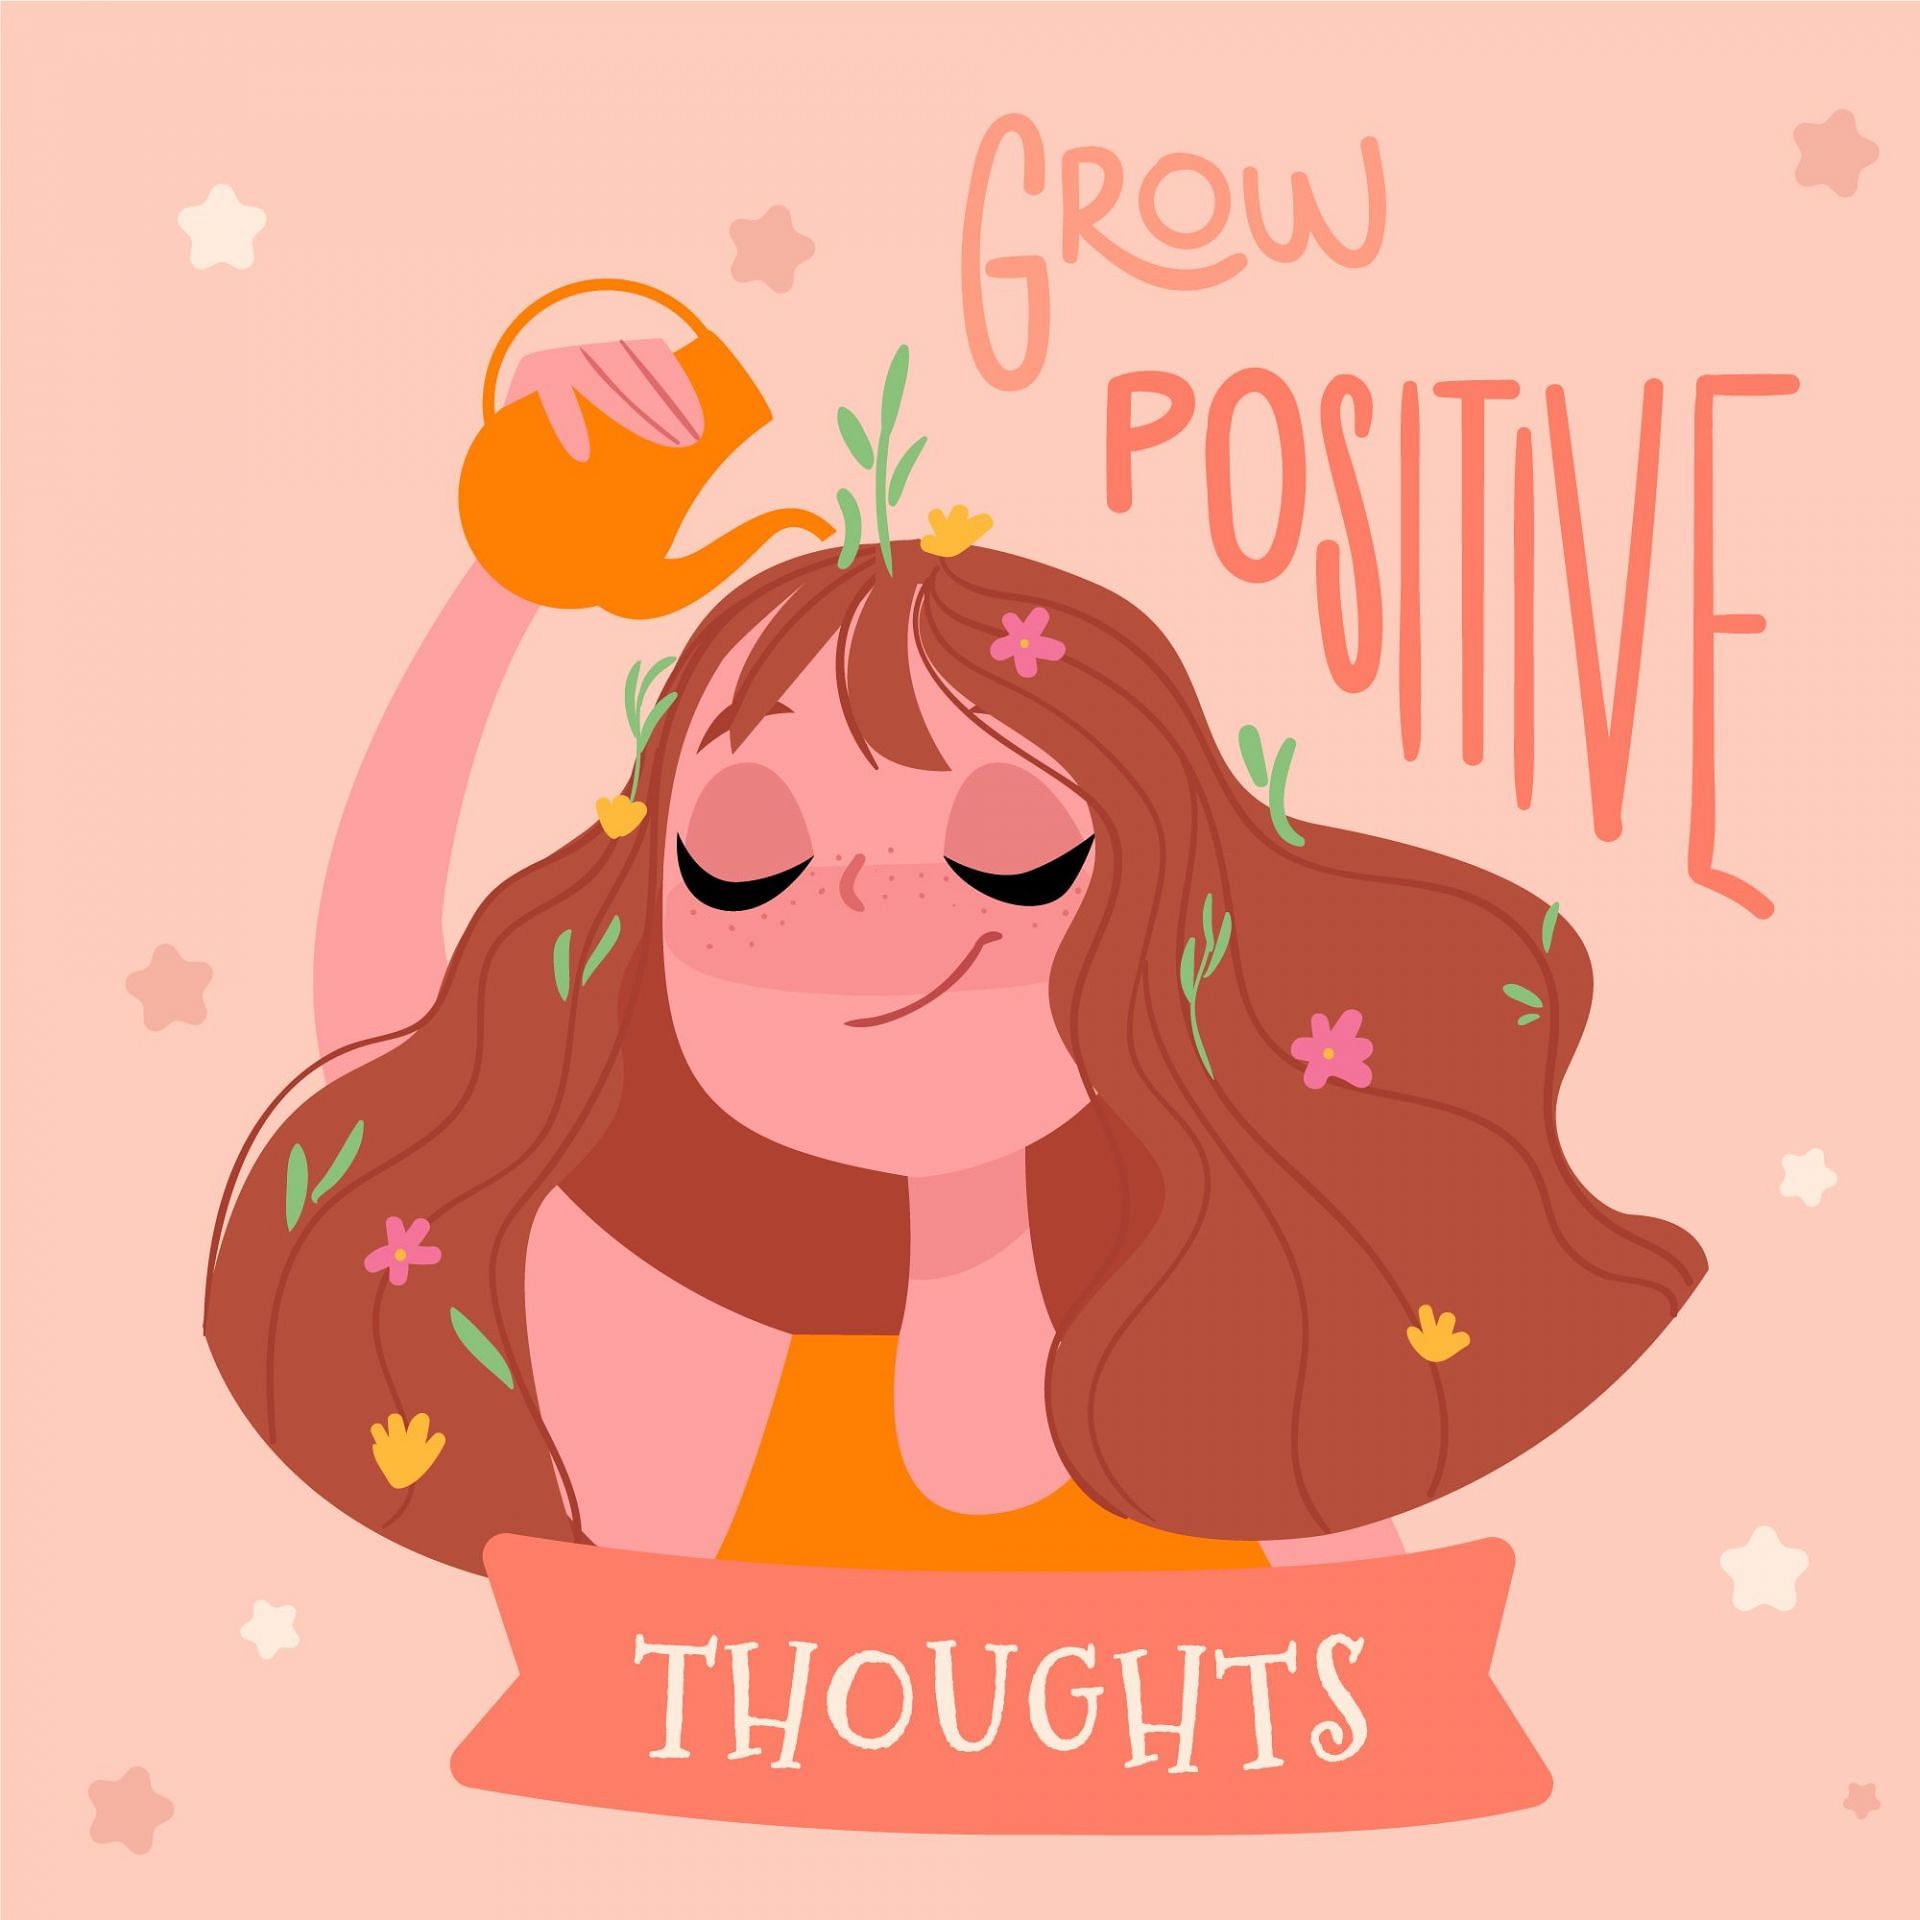 Loving yourself means using positive self-talk and positive affirmations for anxiety is an essential. (Image via Freepik/ Freepik)